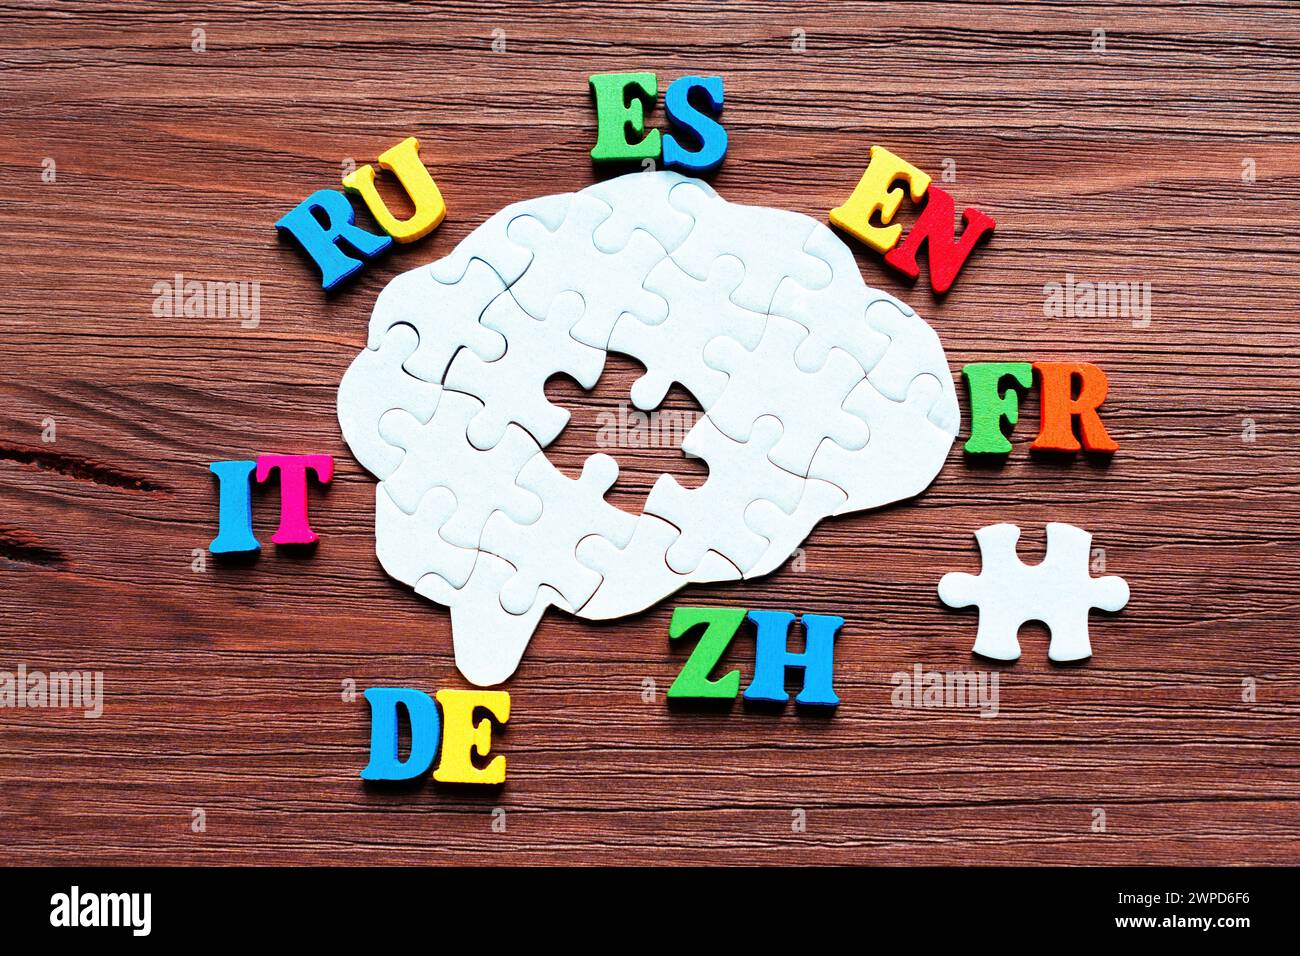 Brain puzzle at the center, with one central piece detached and placed aside. The remaining pieces are surrounded by various colorful two-letter langu Stock Photo